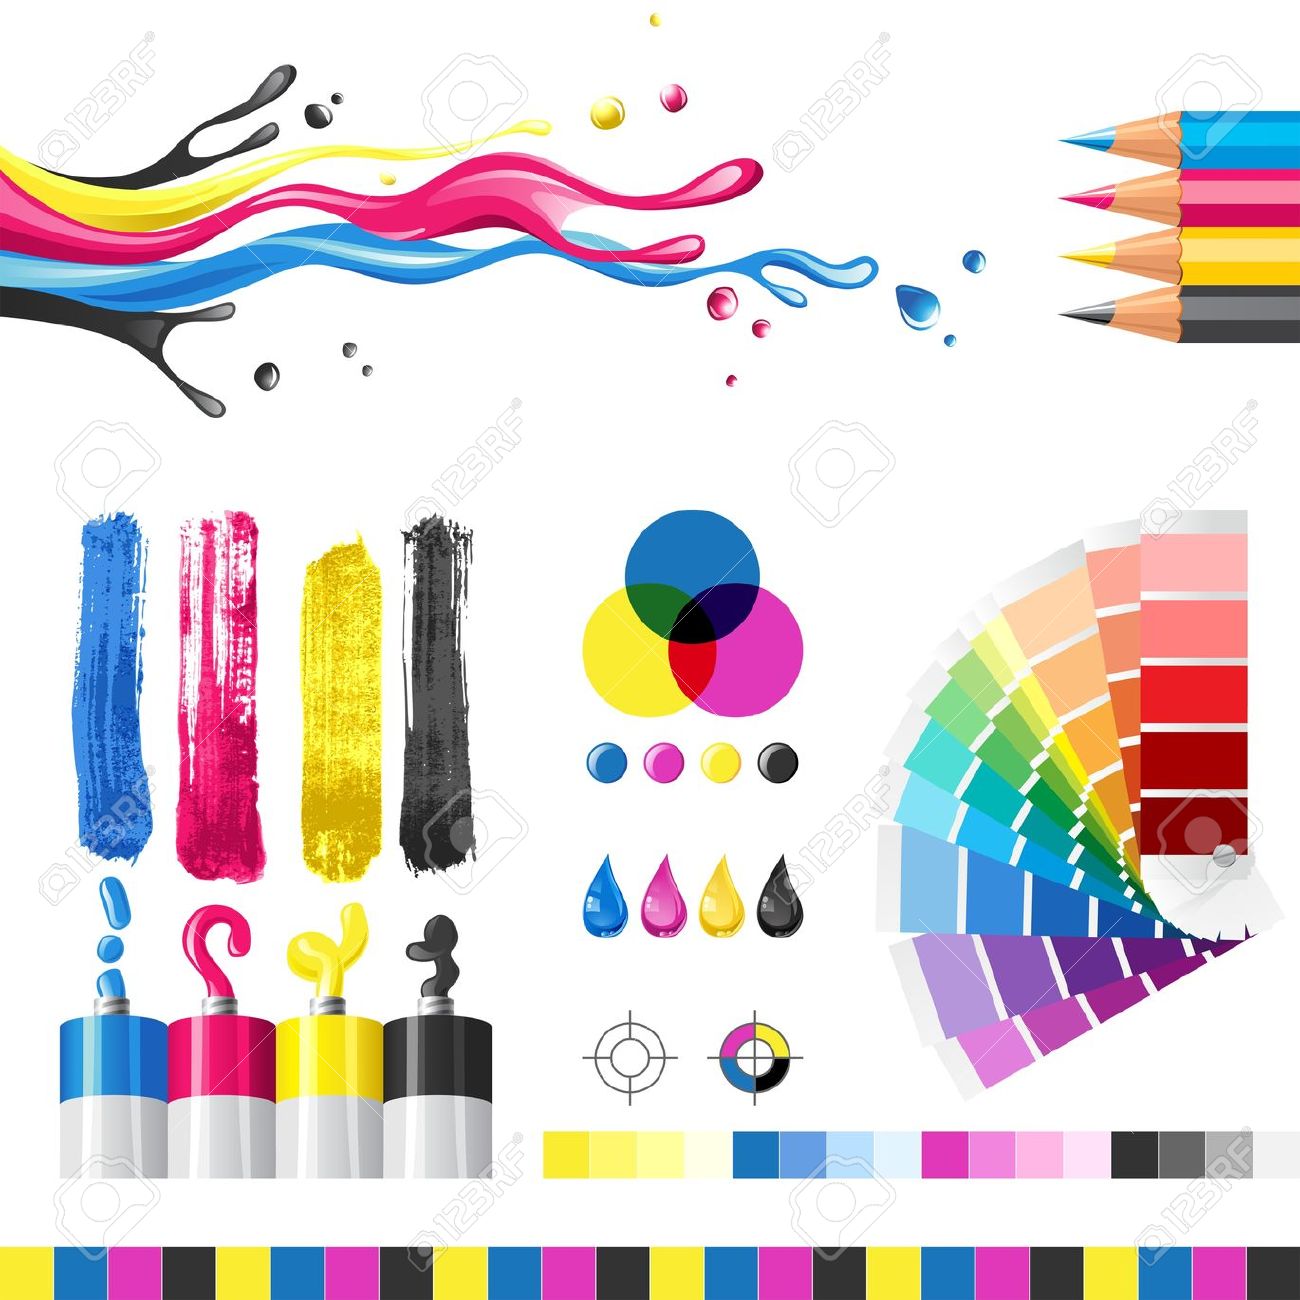 Color printing clipart.